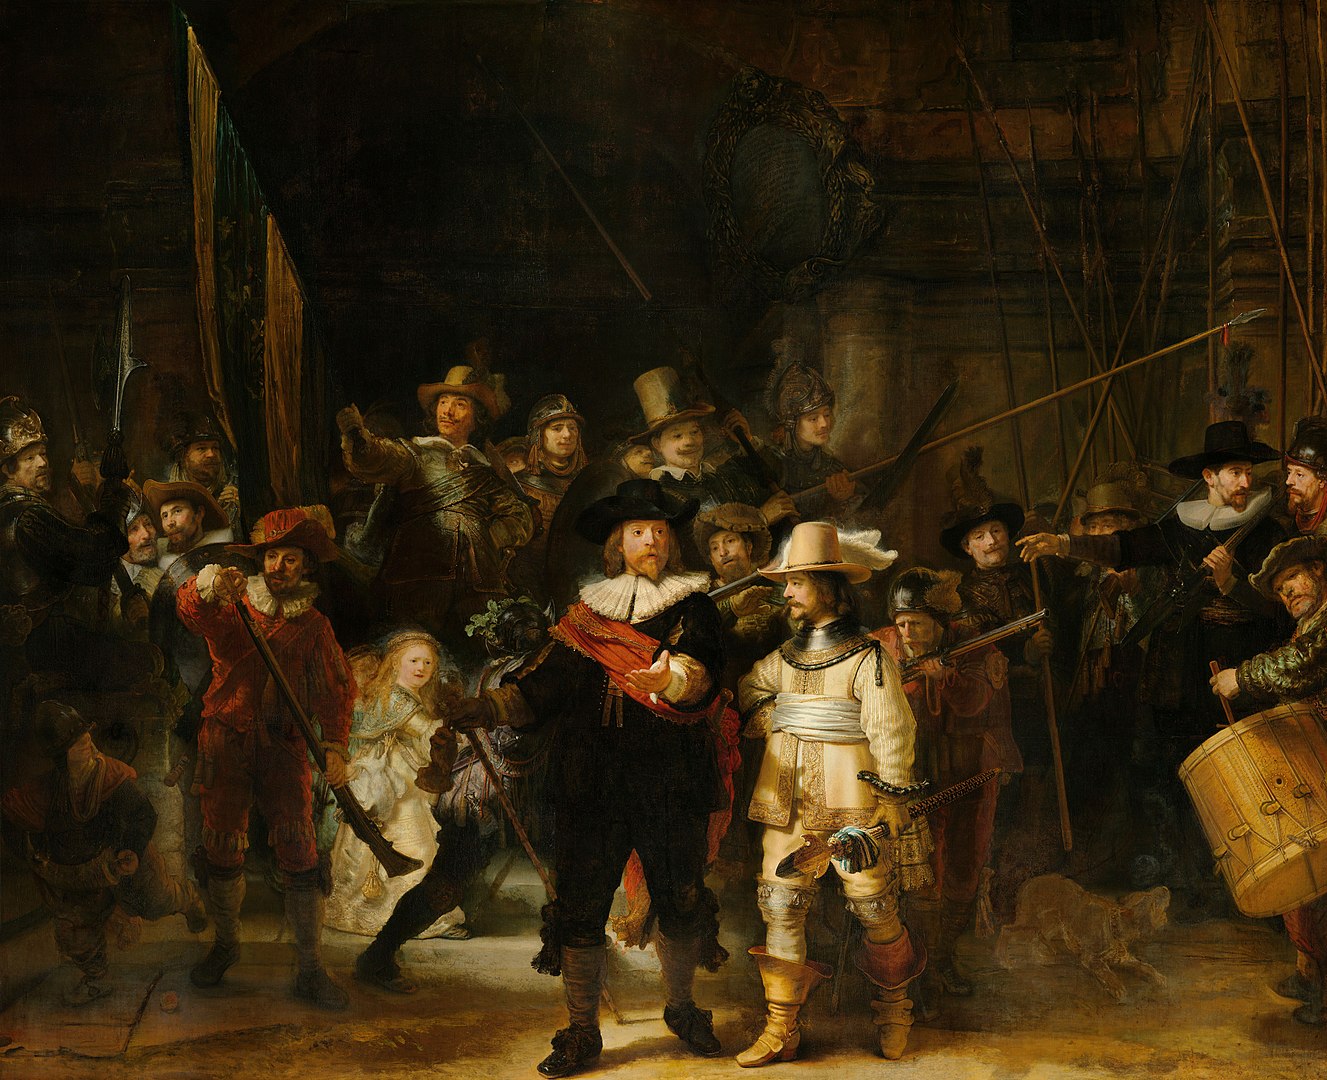 The Night Watch (1642) by Rembrandt